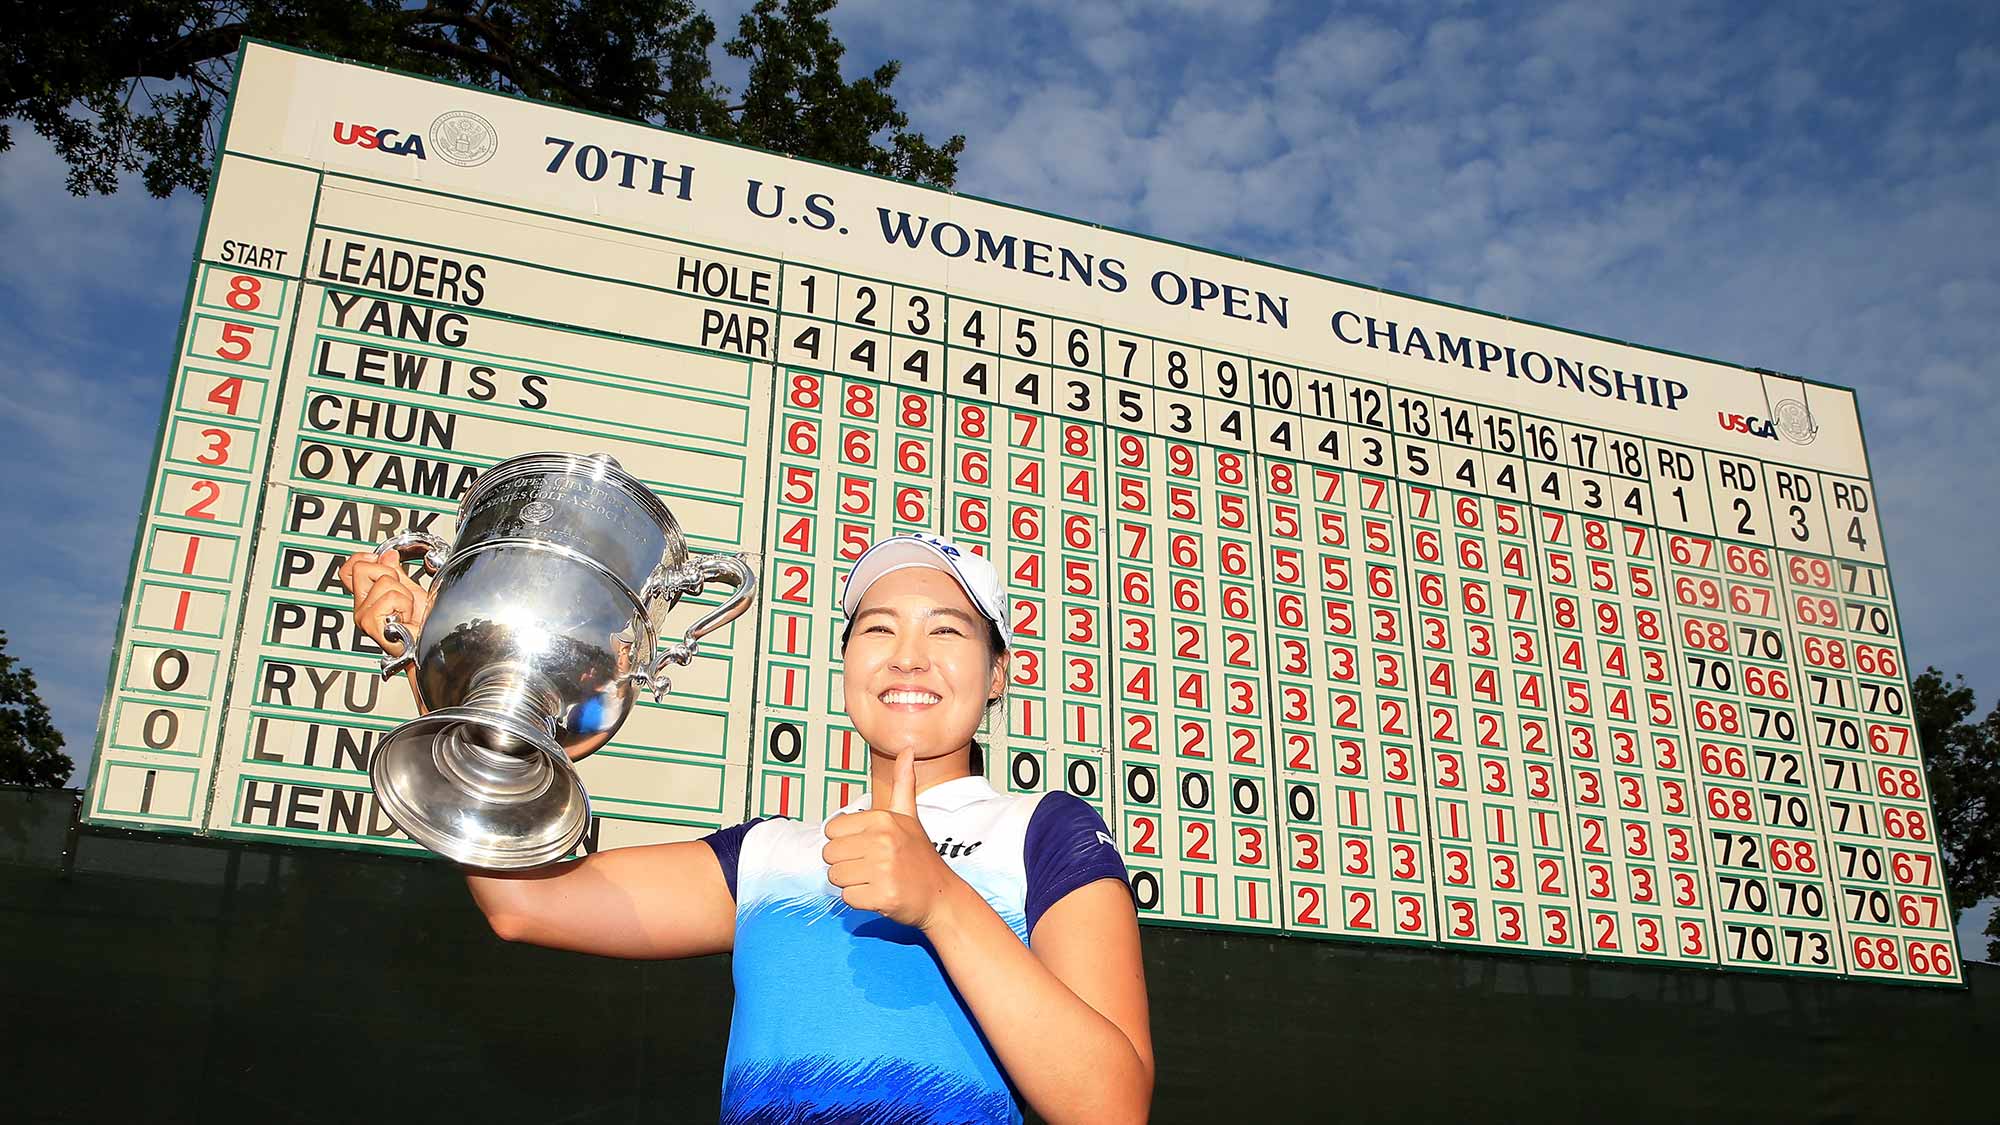 In Gee Chun of South Korea poses with the trophy after winning the U.S. Women's Open at Lancaster Country Club